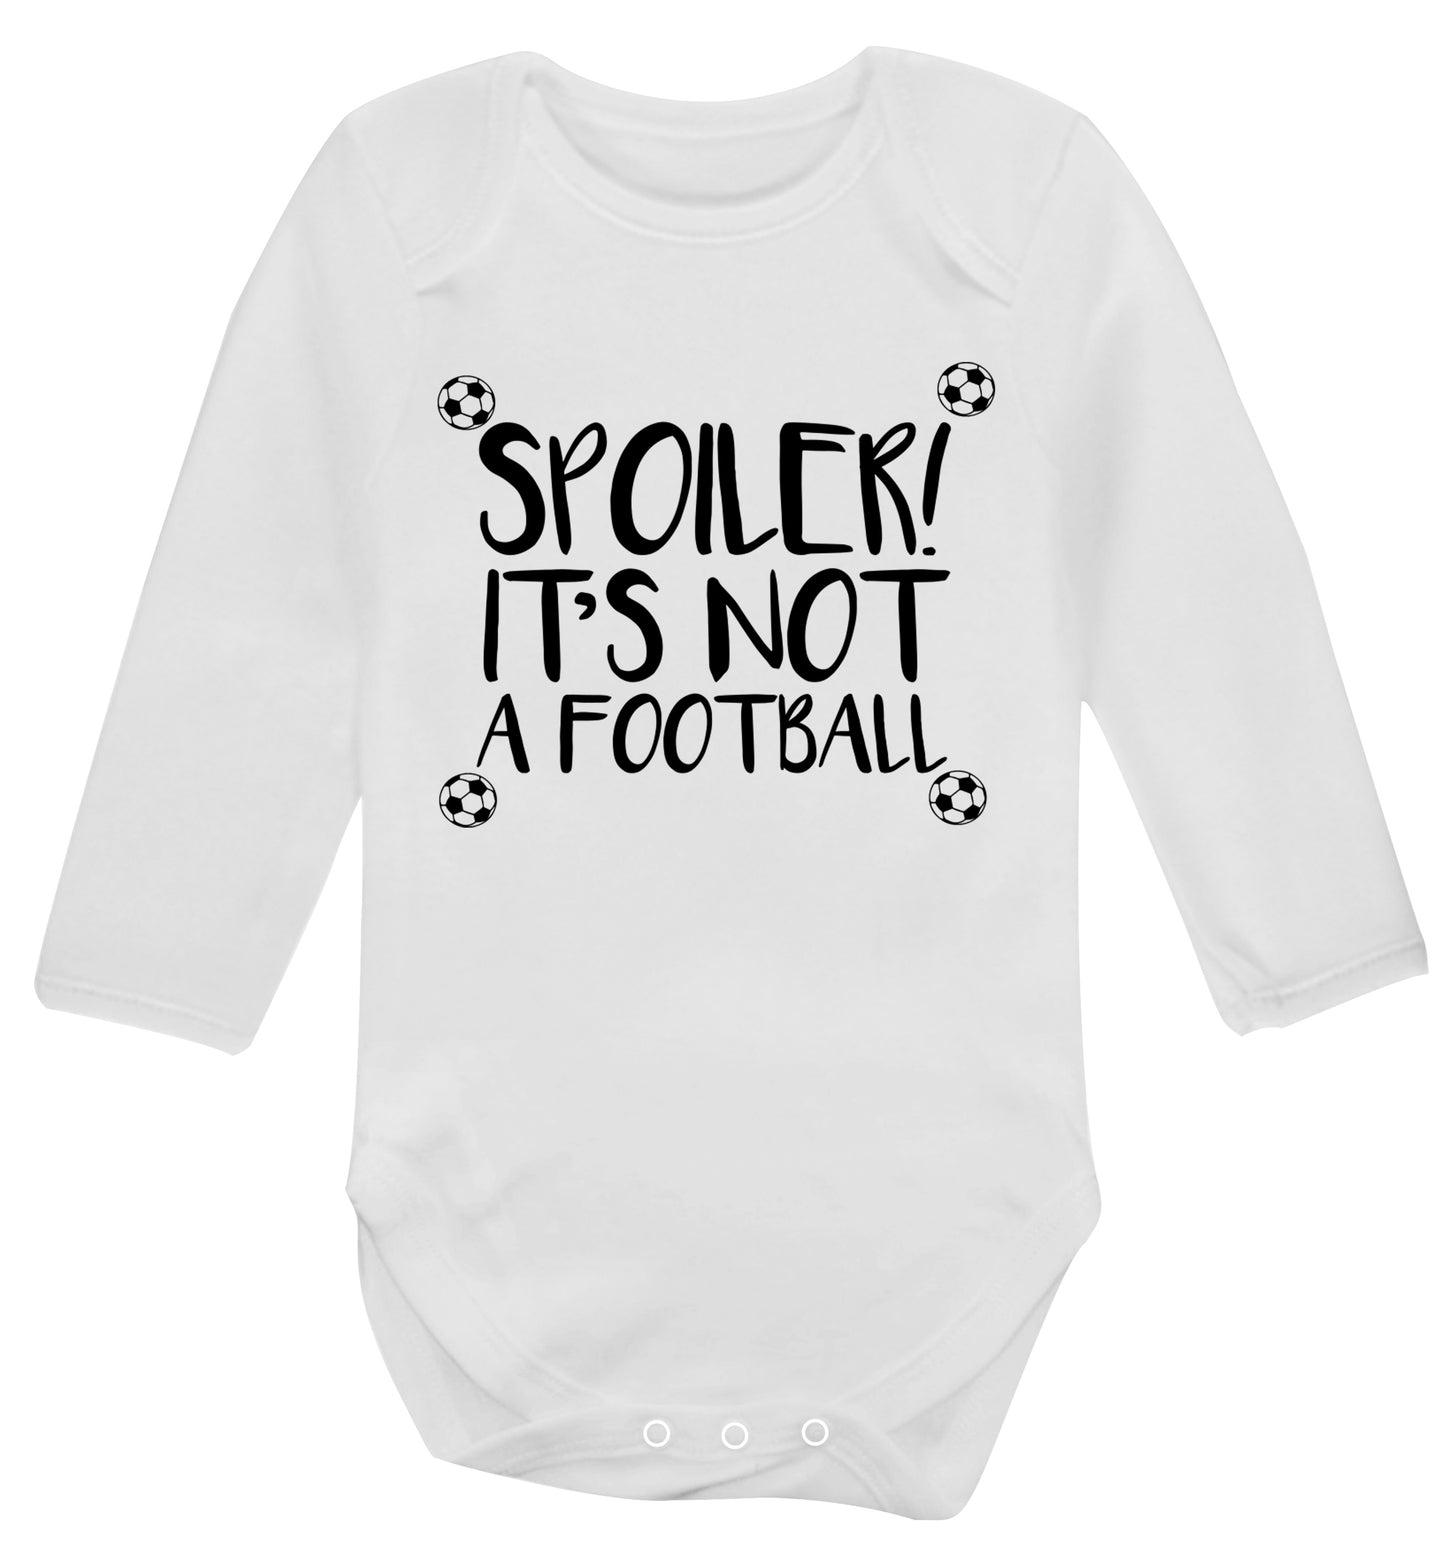 Spoiler it's not a football Baby Vest long sleeved white 6-12 months